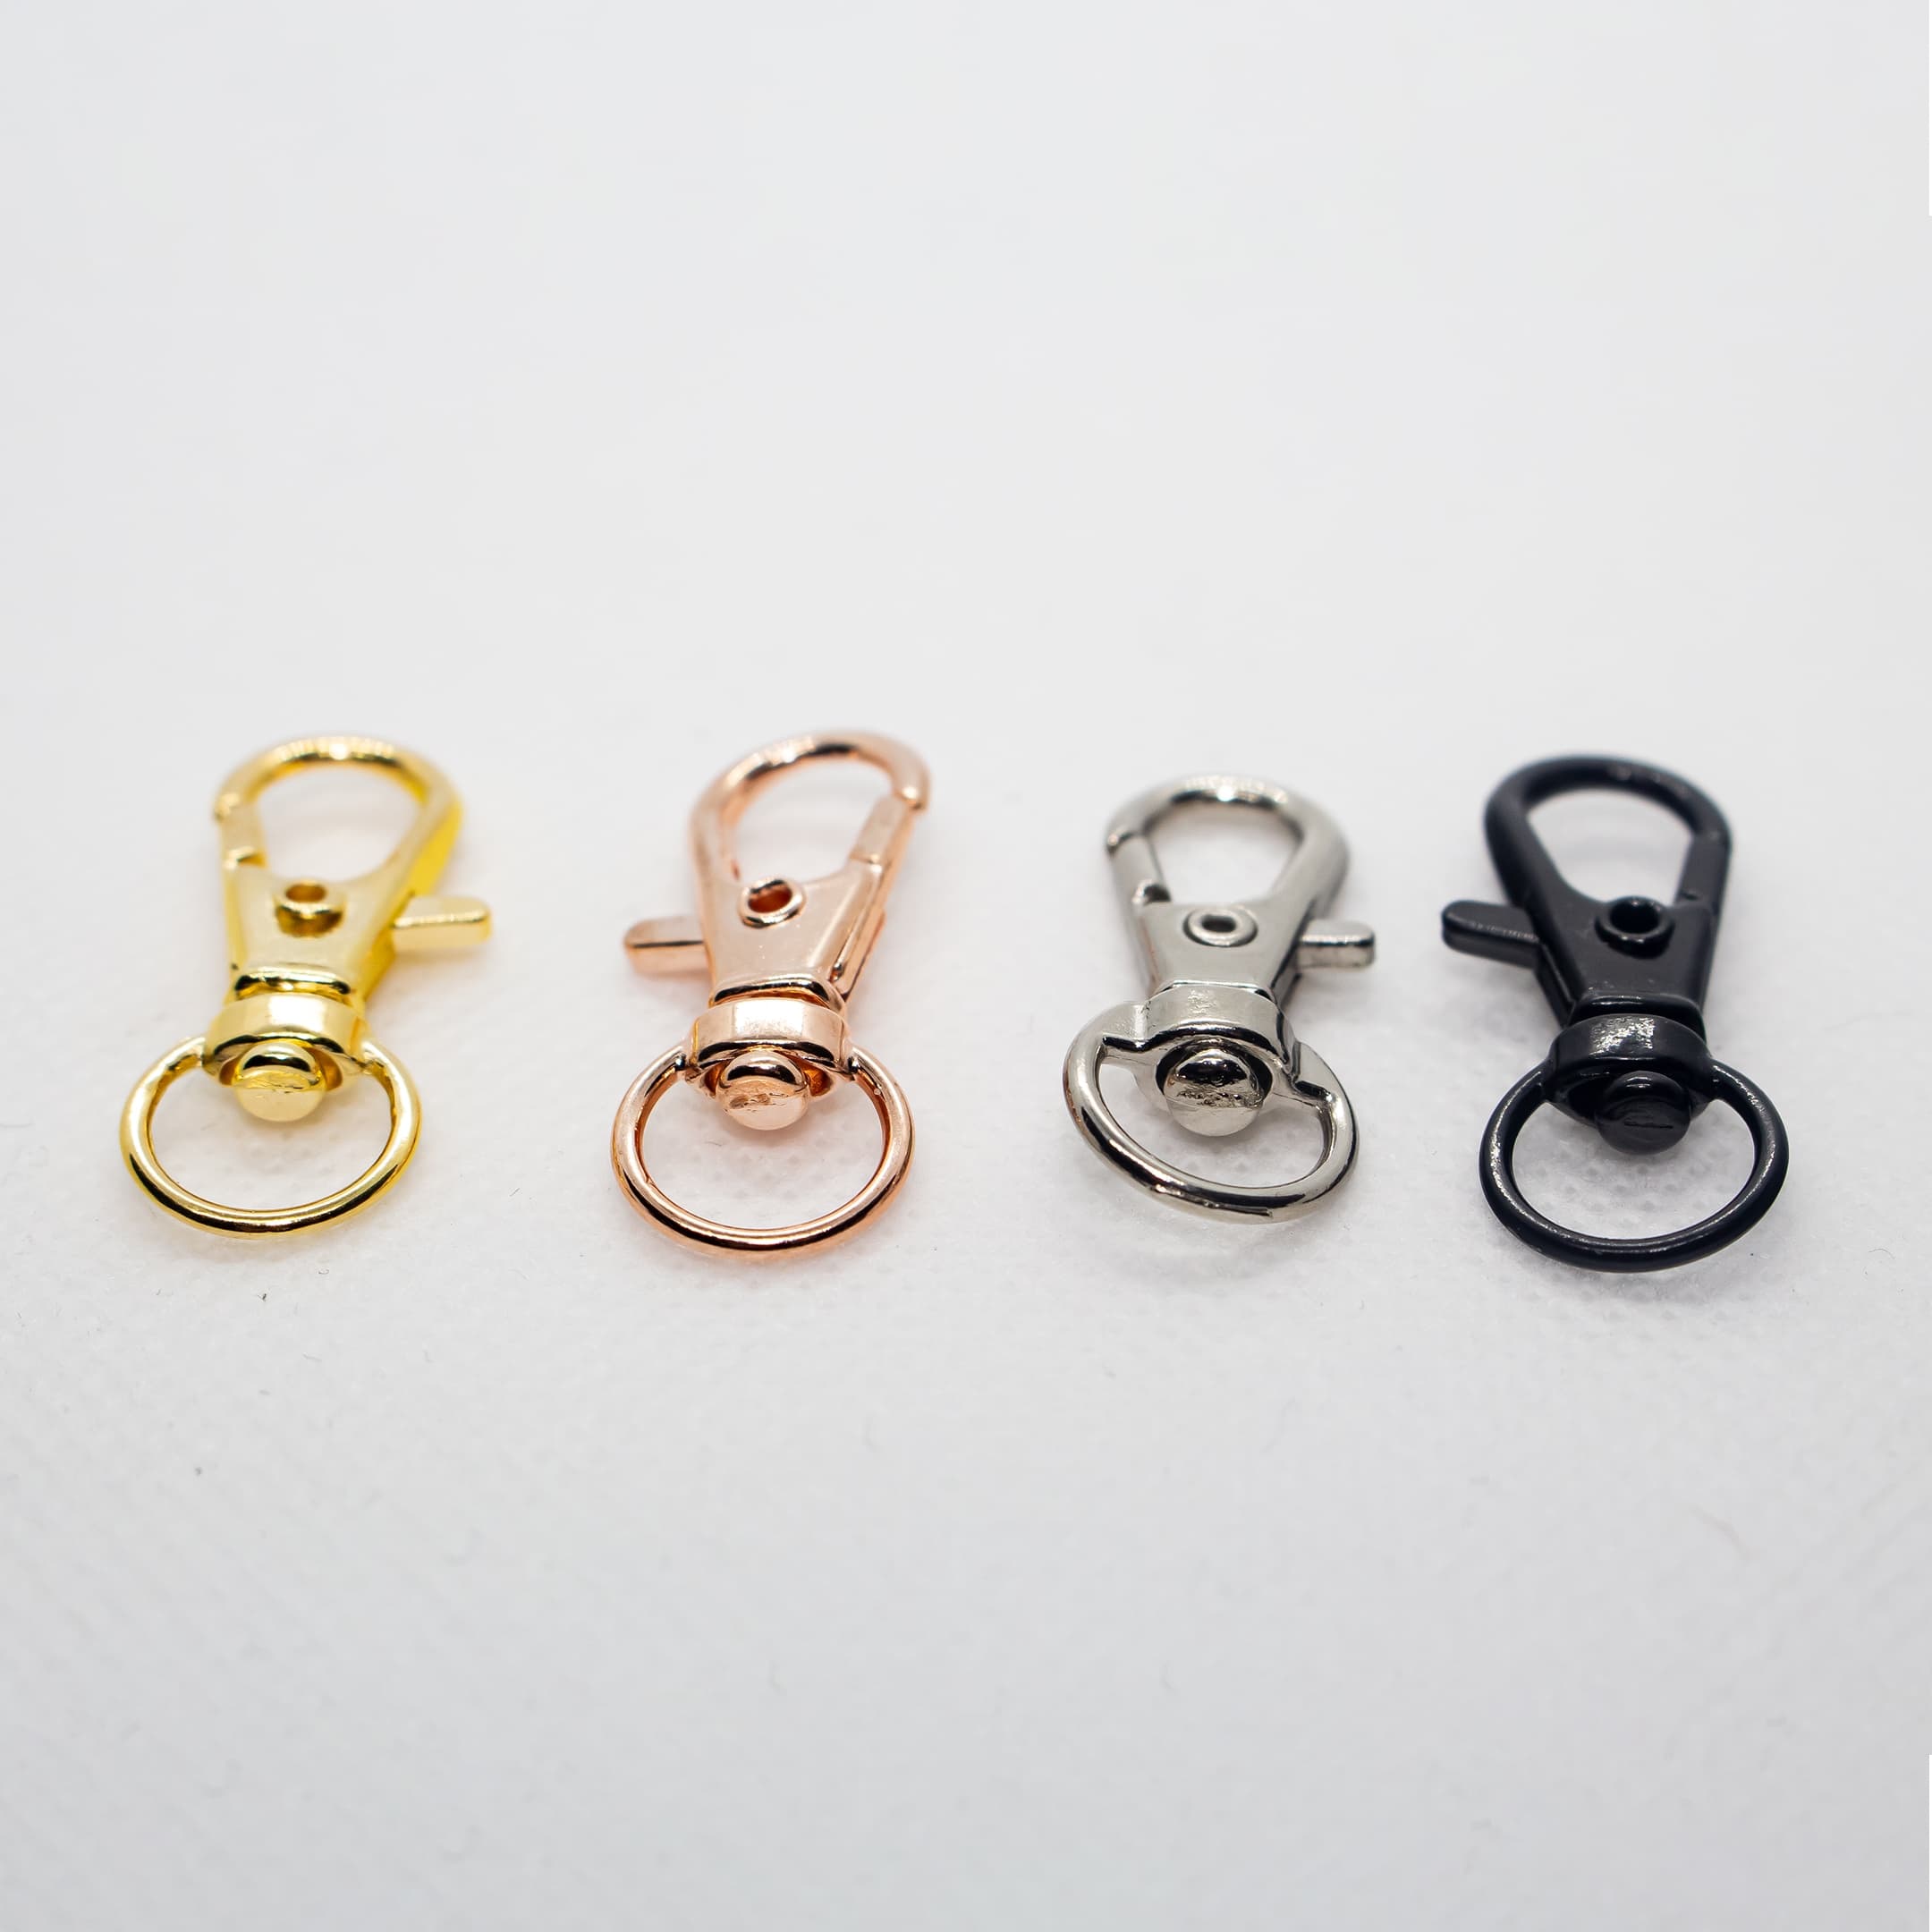 Add-on - Coloured Carabiner